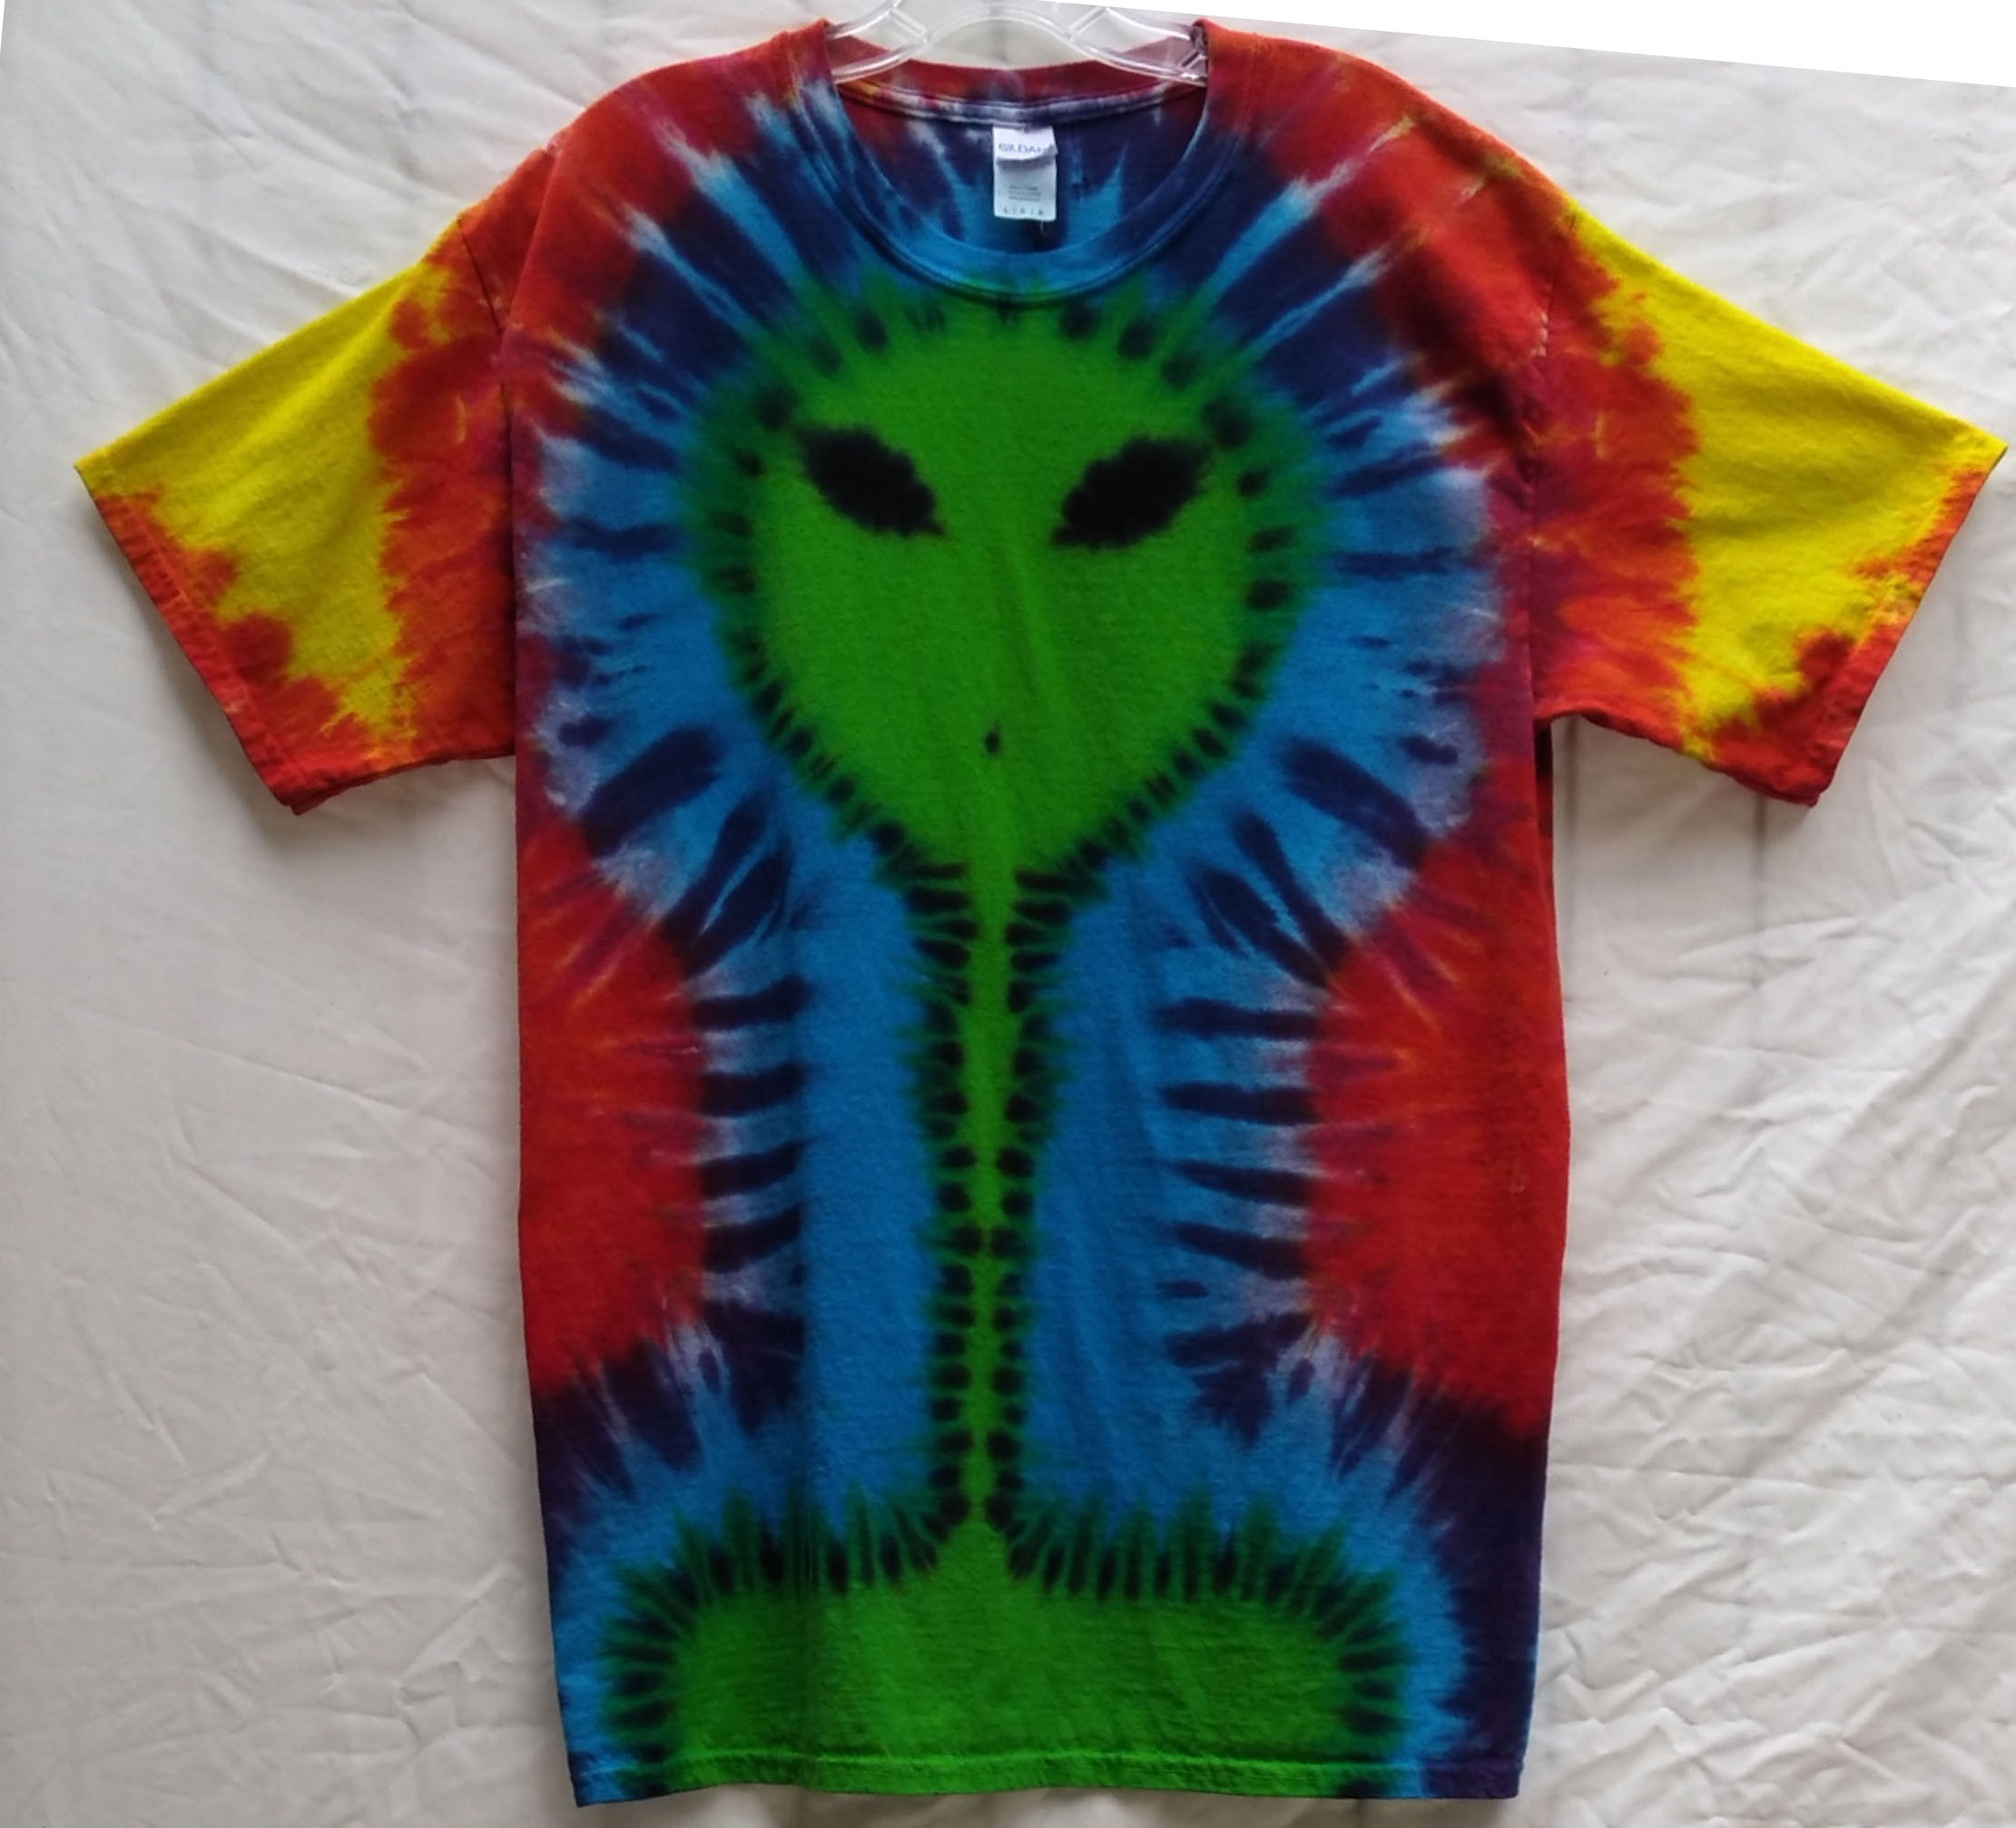 Just try not flying your saucer while sporting your Rainbow Long Neck Alien tiedye Tee! 